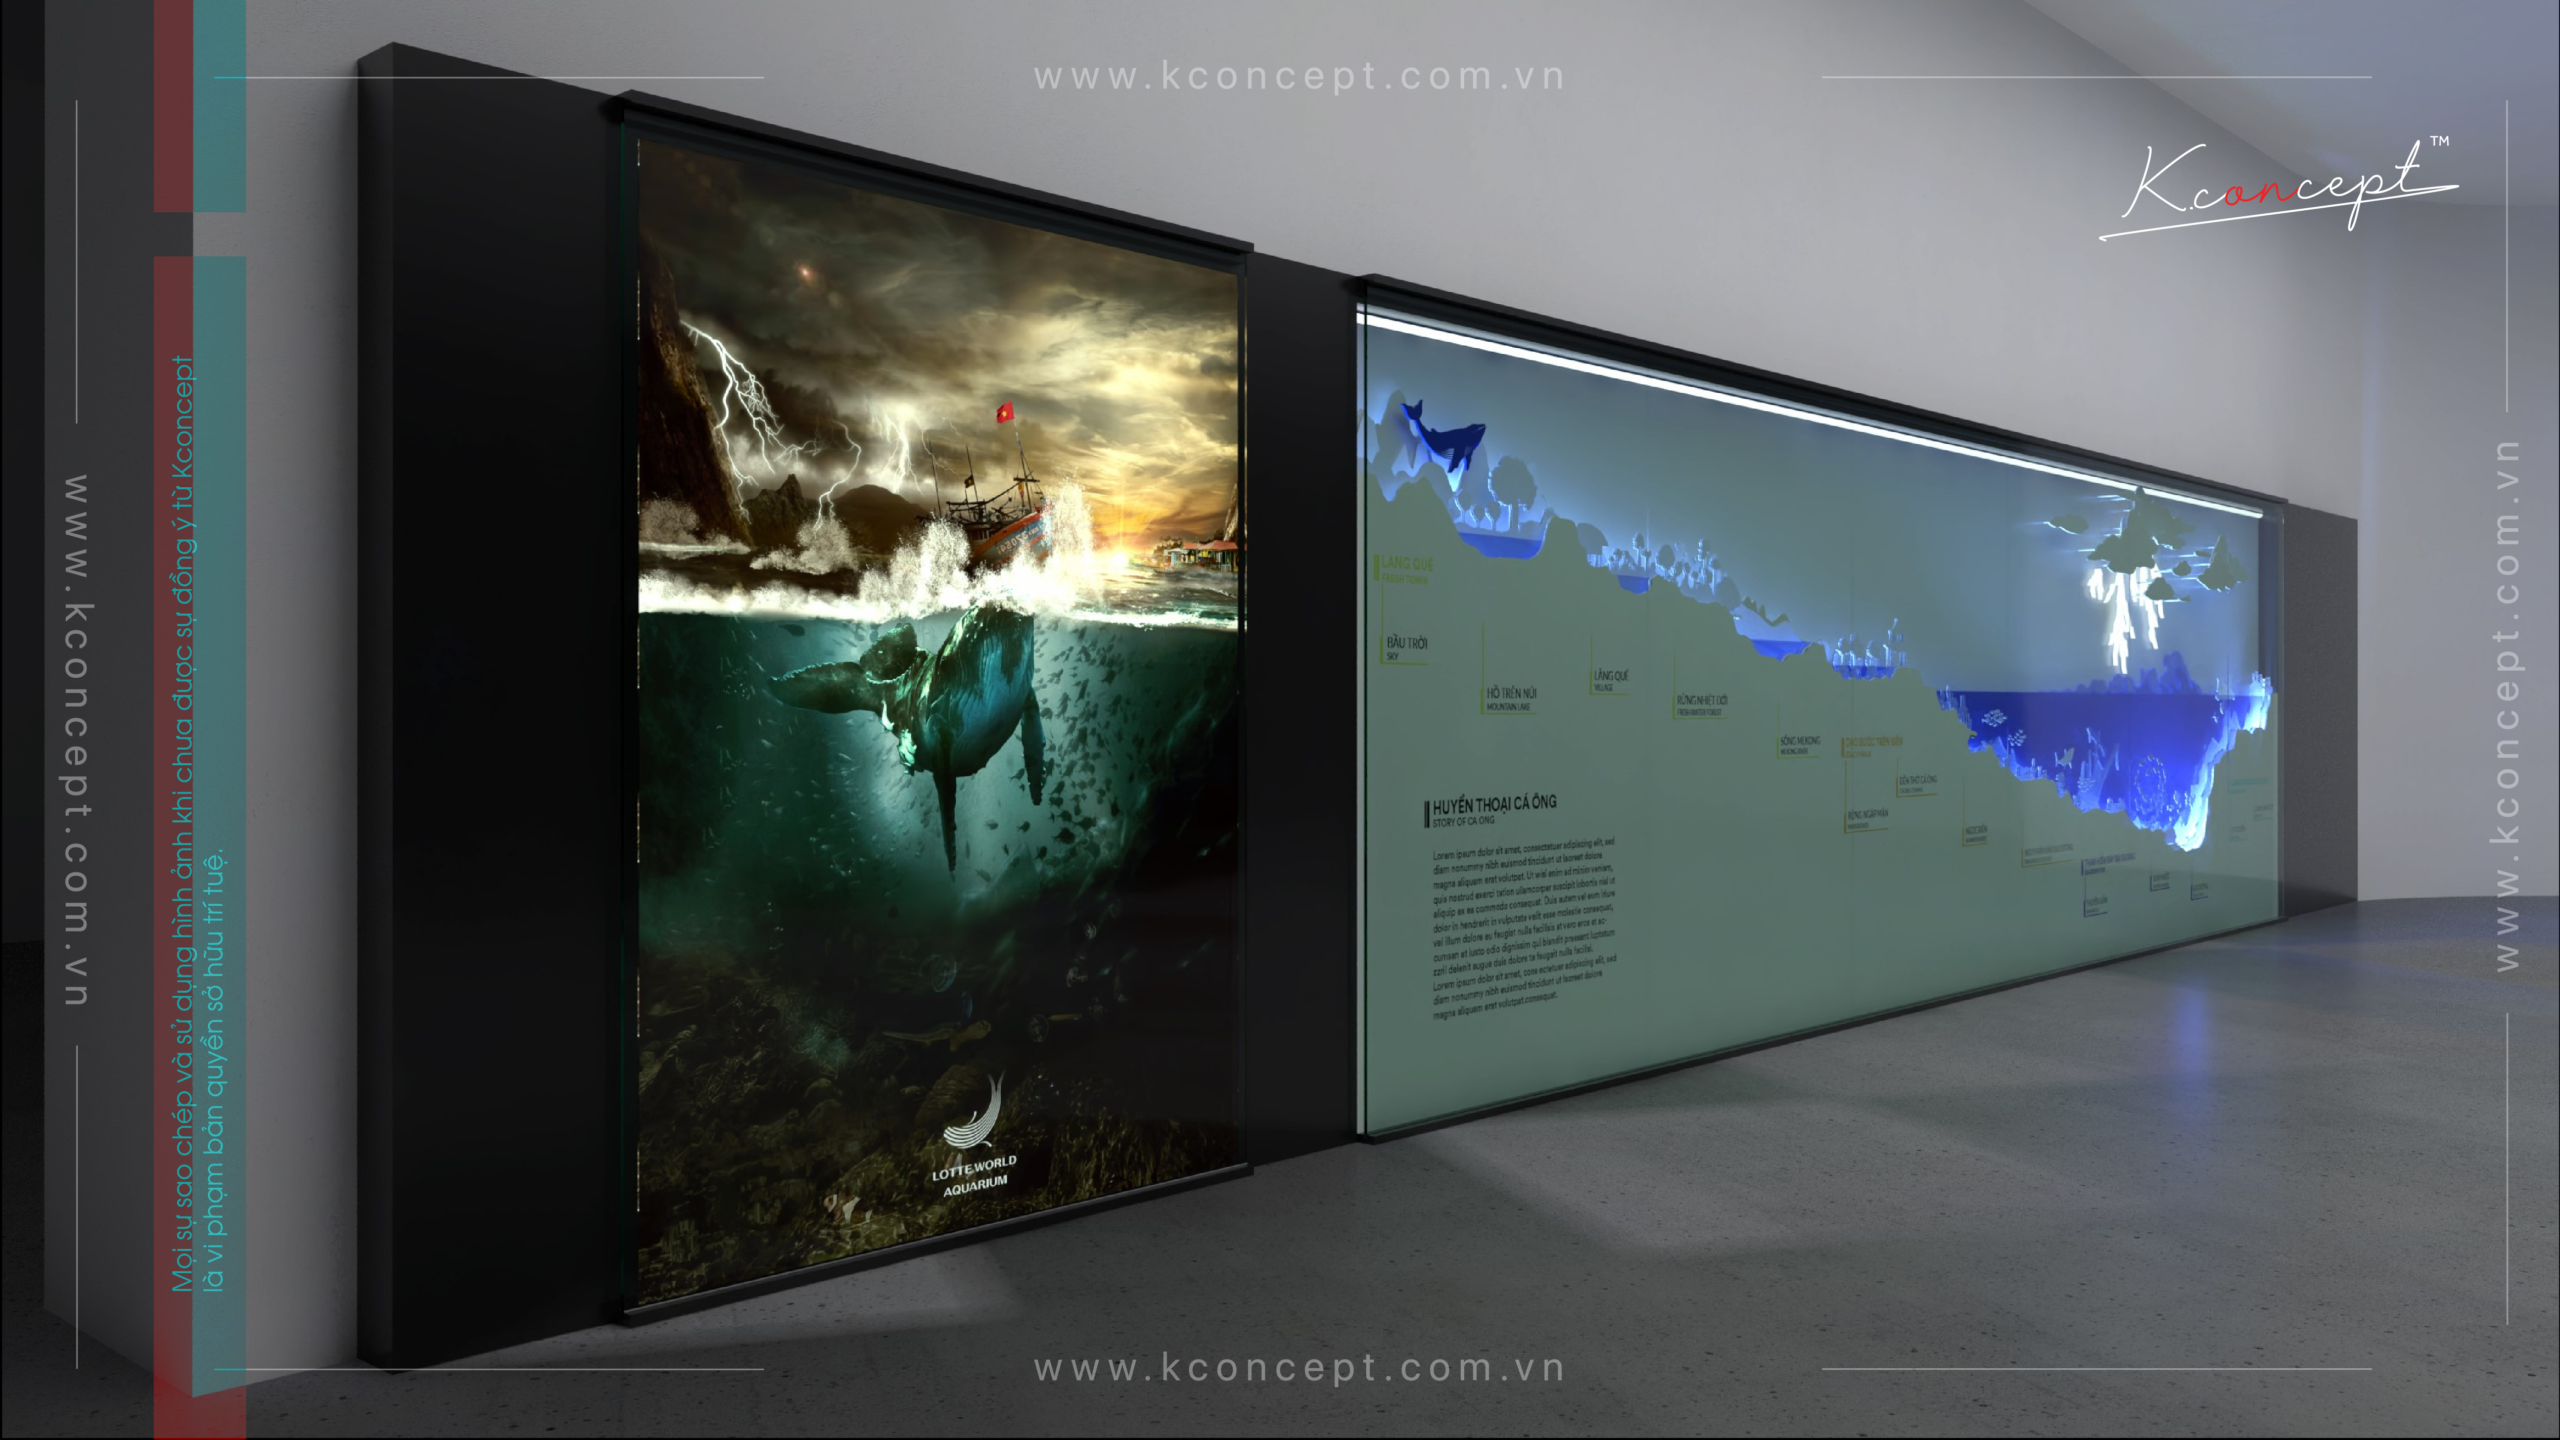 Aquarium cracked wall signage information board by Kconcept